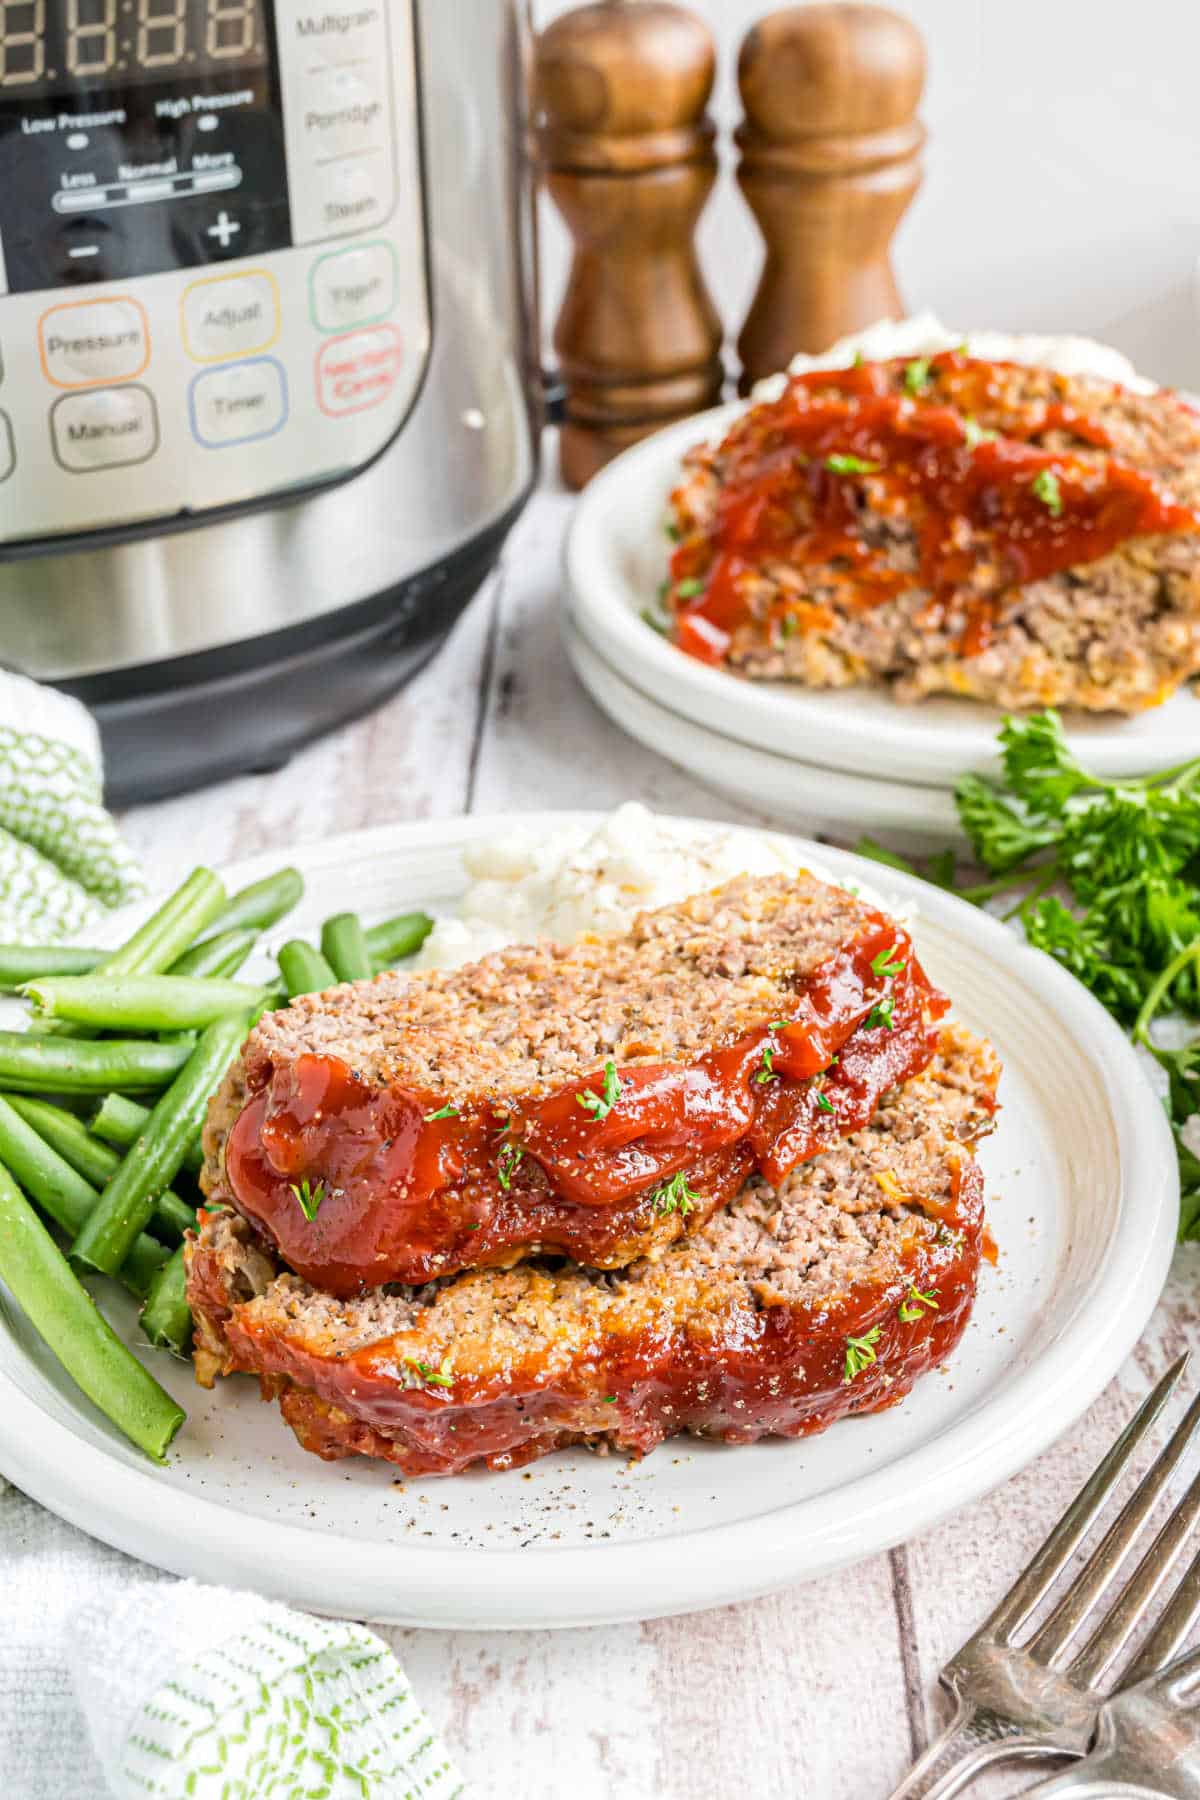 Two slices of meatloaf on a white plate with green beans.